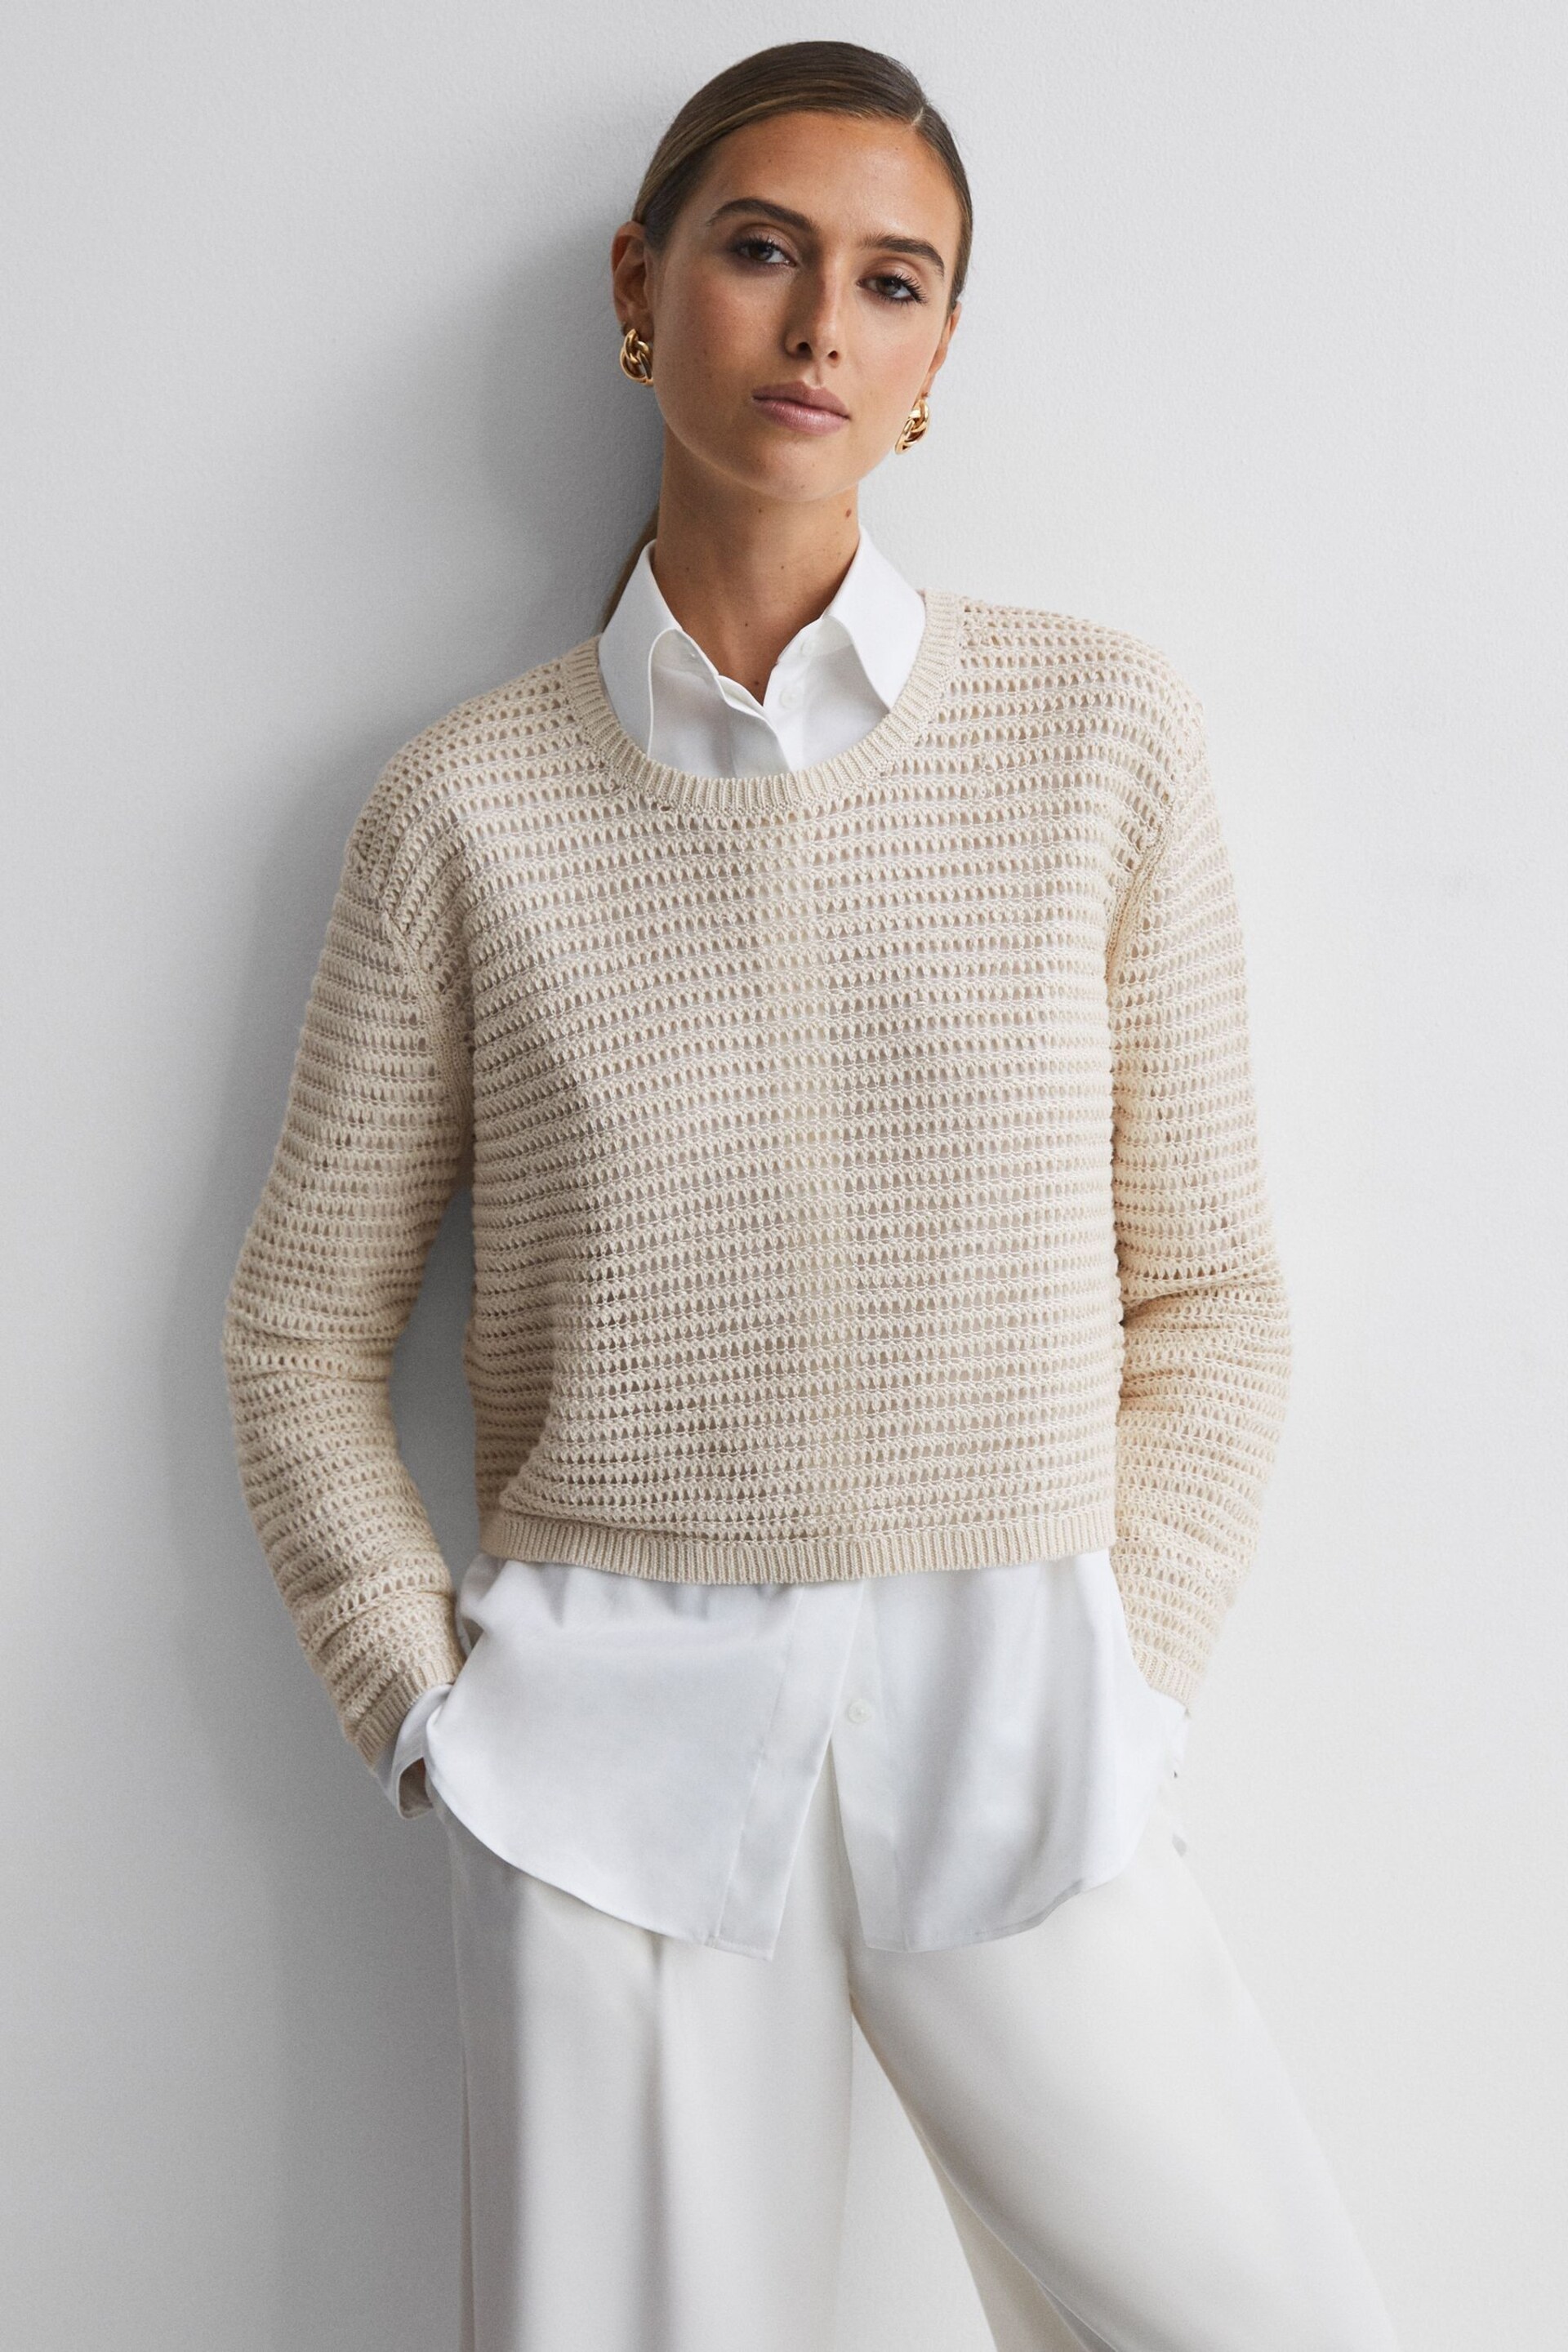 Reiss Ivory Avril Linen Open Stitch Crew Neck Jumper - Image 1 of 4